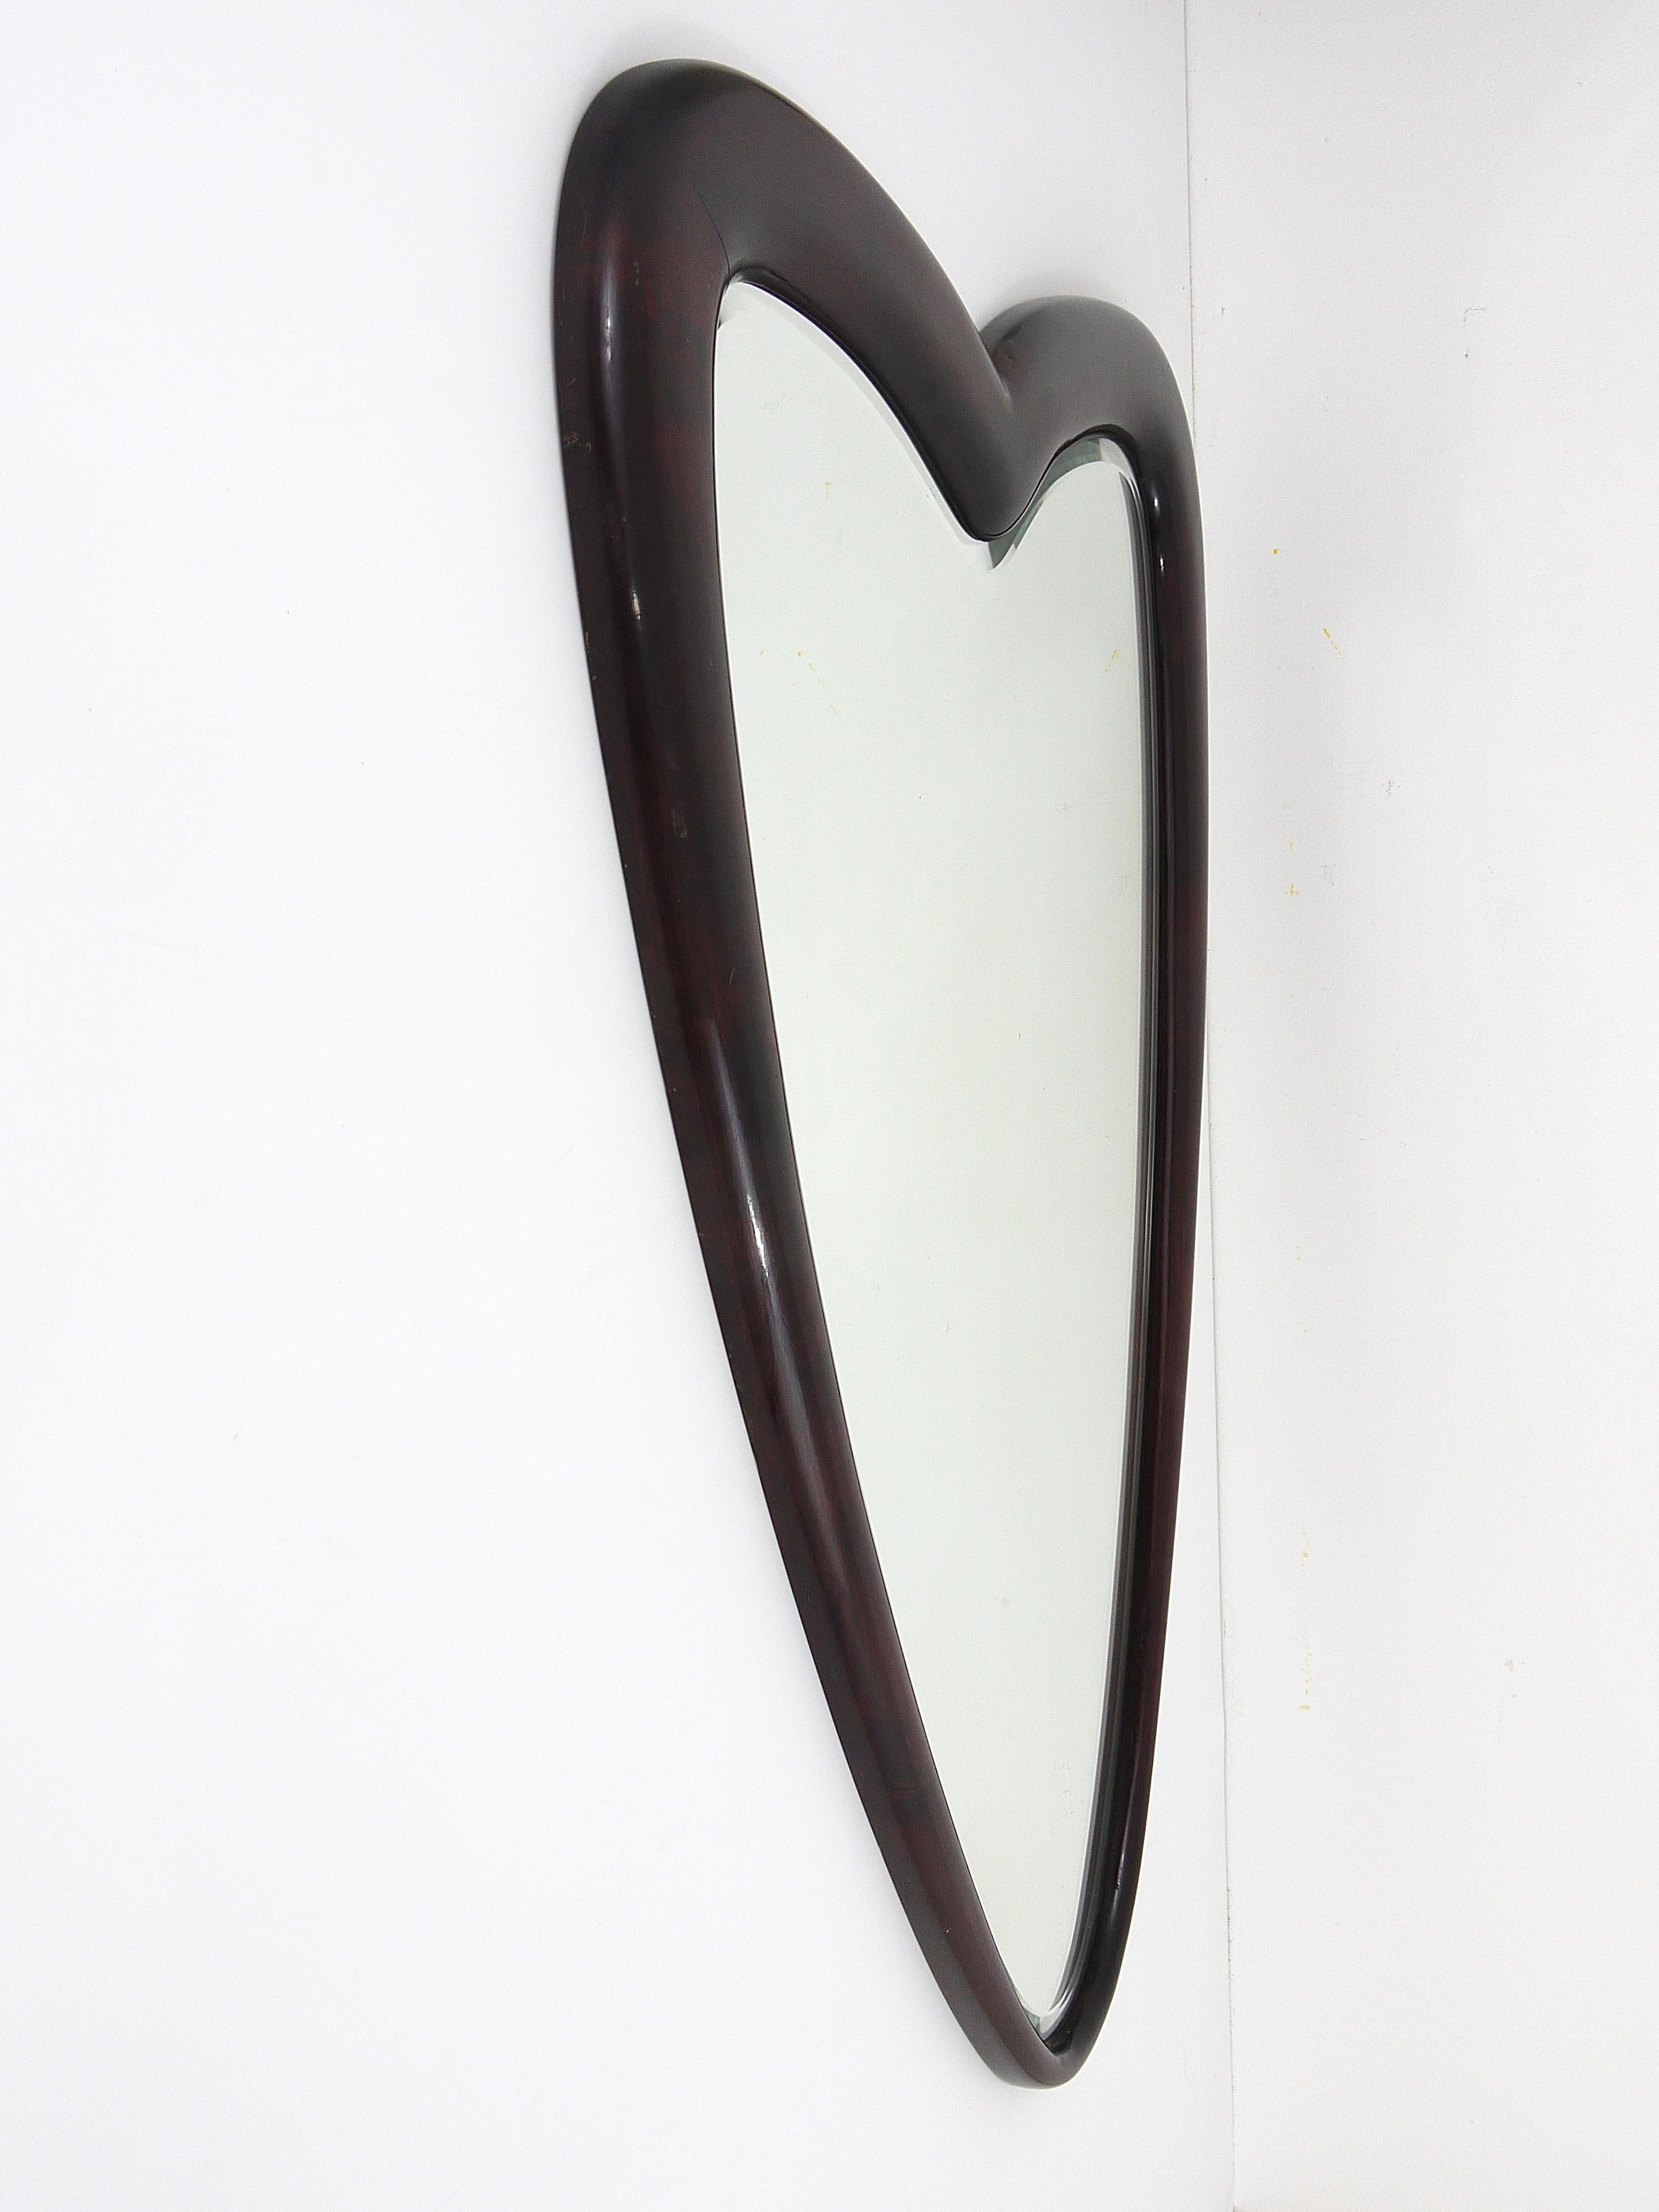 A beautiful, big heart-shaped wall mirror. Made in Italy in the 1940s, has a facetted mirror glass and a frame made of dark wood. A very elegant Italian mirror in very good condition. Measures : 27x39